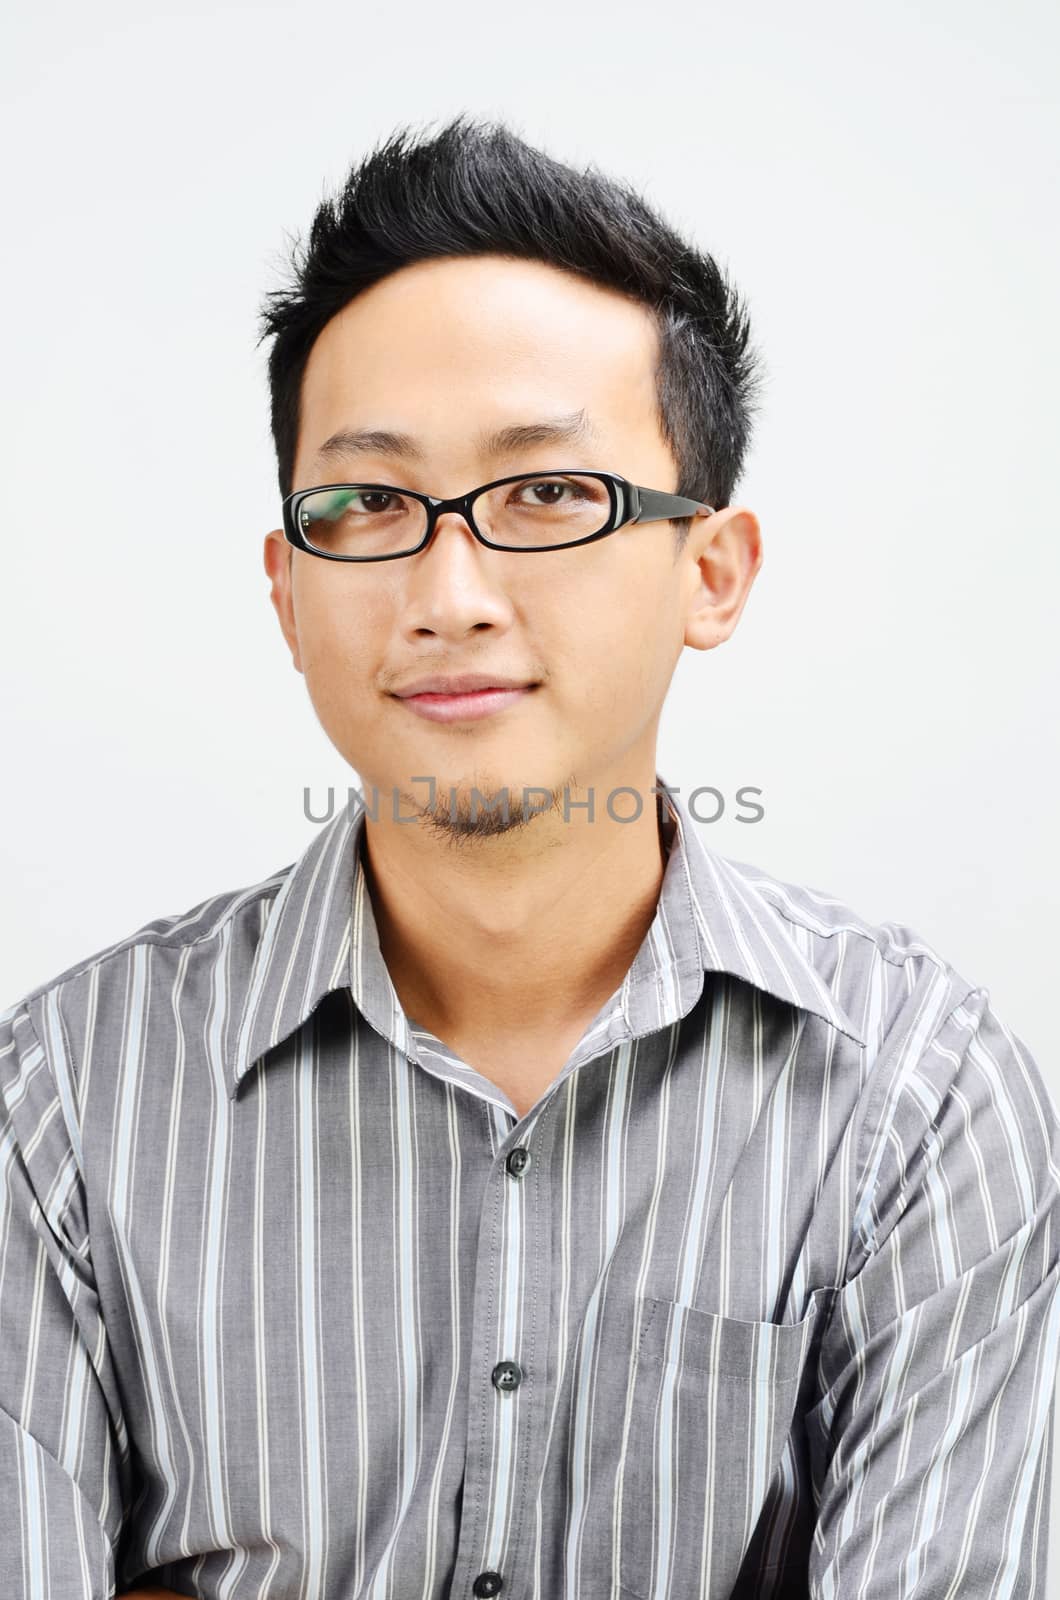 Portrait of cool Asian businessman smiling, standing isolated on plain background.